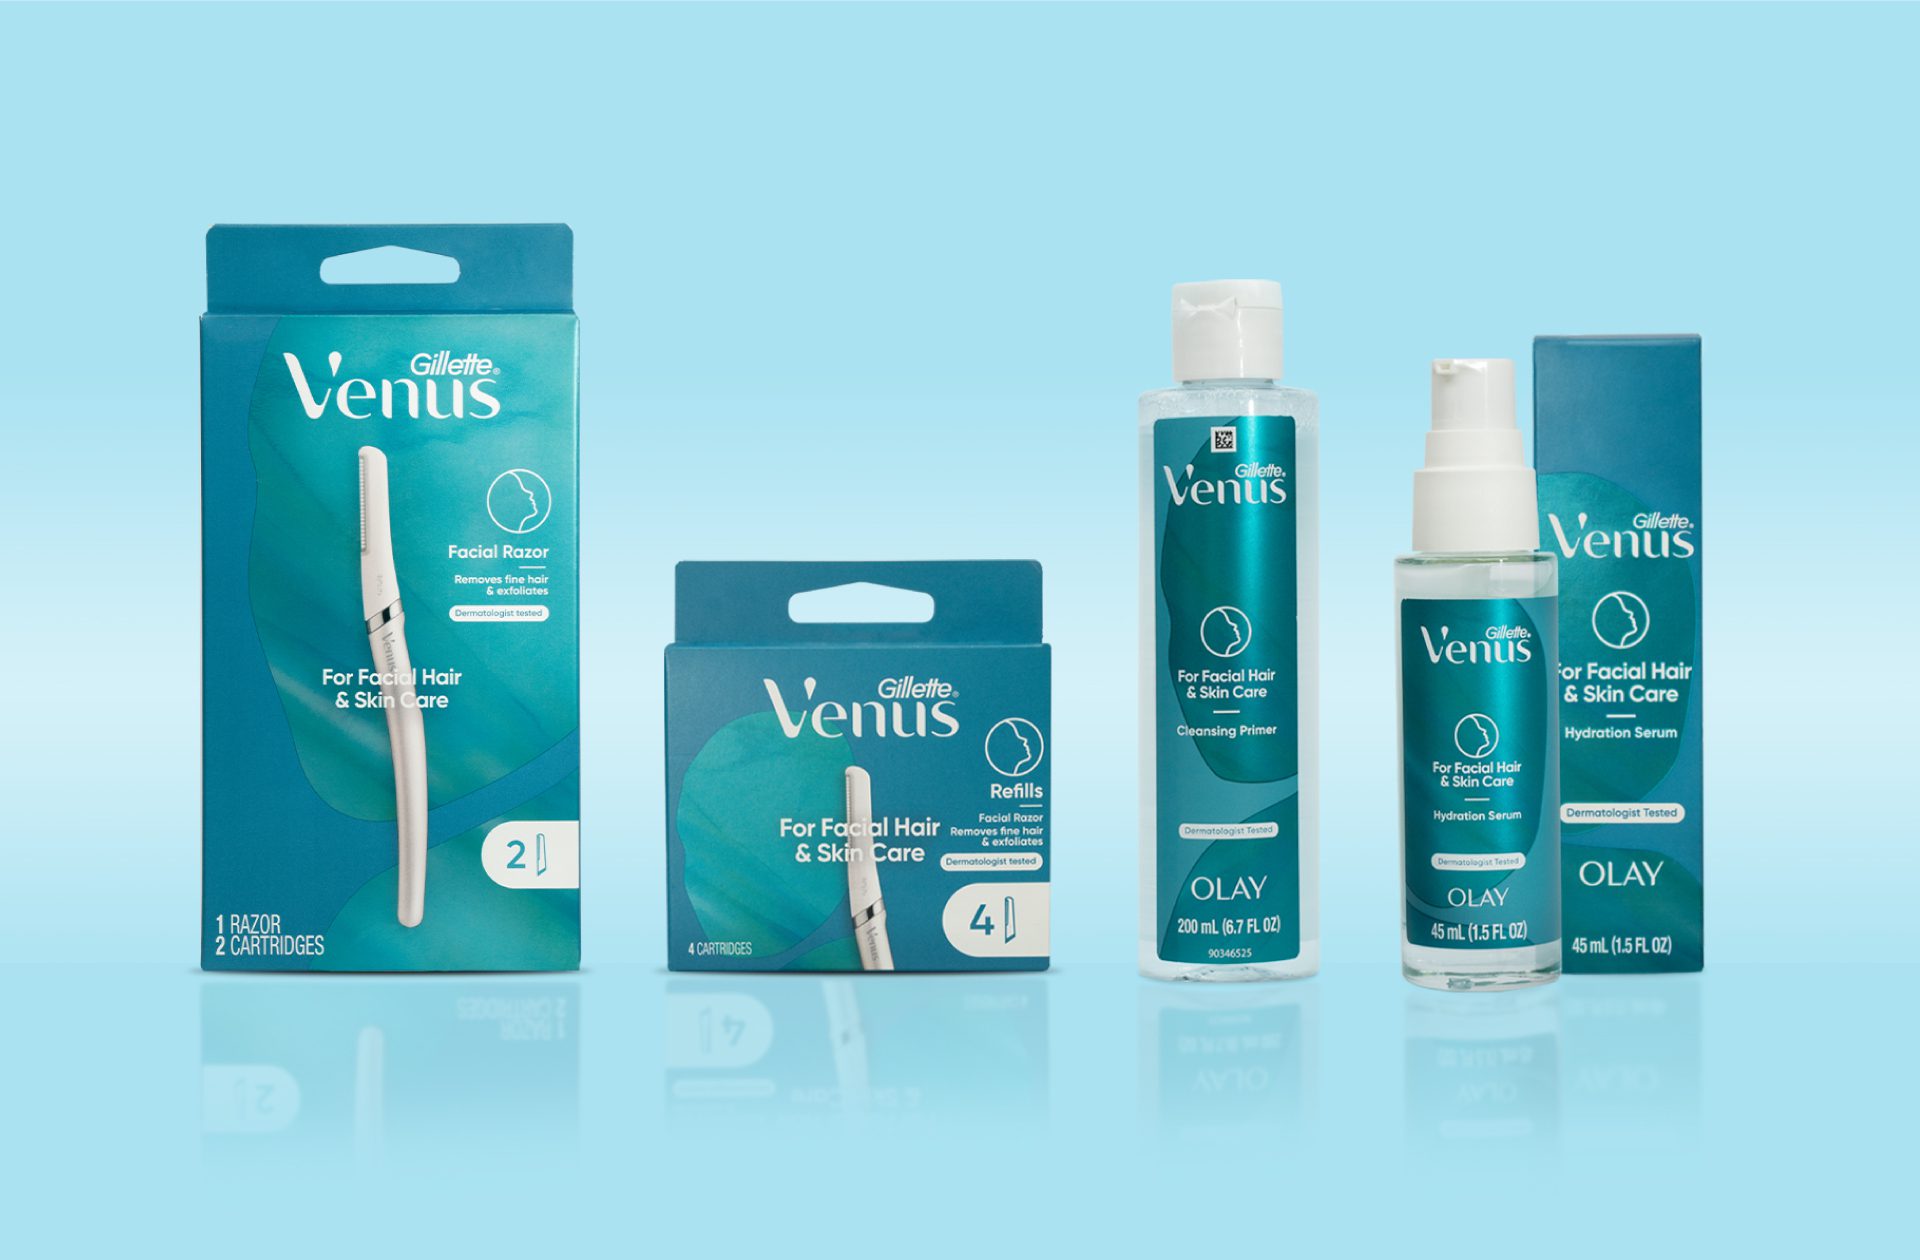 Photograph a full product line for a dermaplaning at home skincare range by Gillette Venus, showcasing Cpg packaging design services.